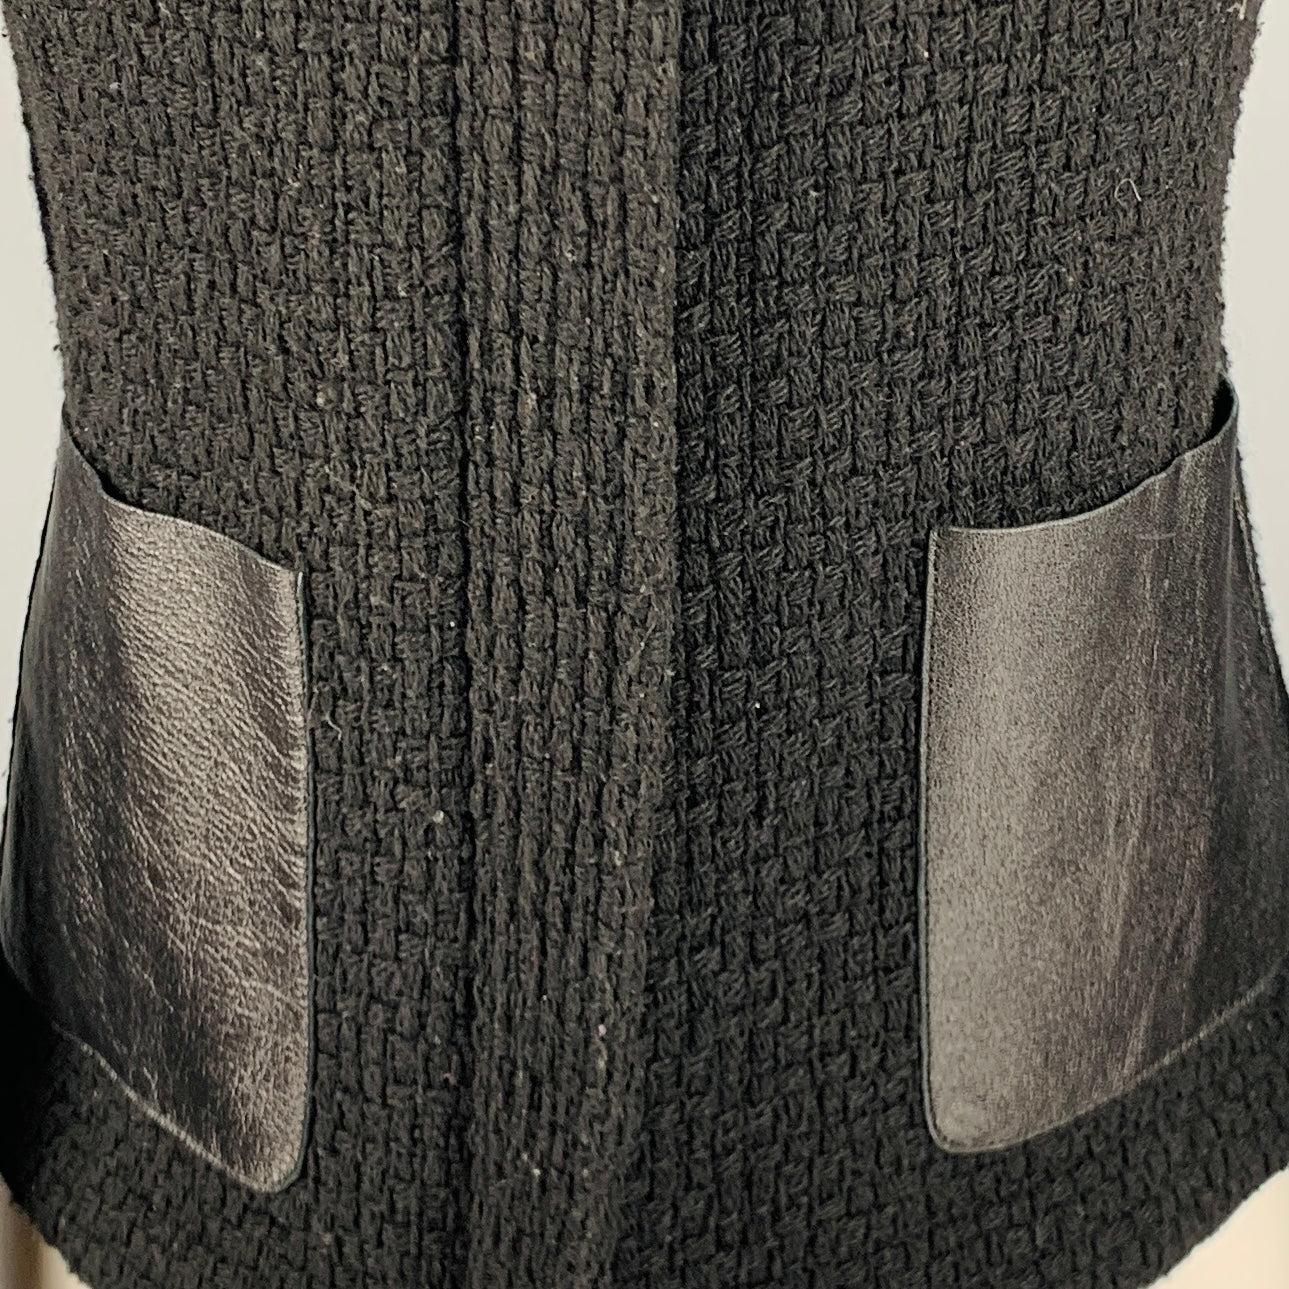 VINCE jacket
in a black woven wool blend fabric featuring two faux leather pockets, a collarless style, and zip up closure.Very Good Pre-Owned Condition. Moderate pilling. 

Marked:   6 

Measurements: 
 
Shoulder: 13.5 inches Bust: 30 inches